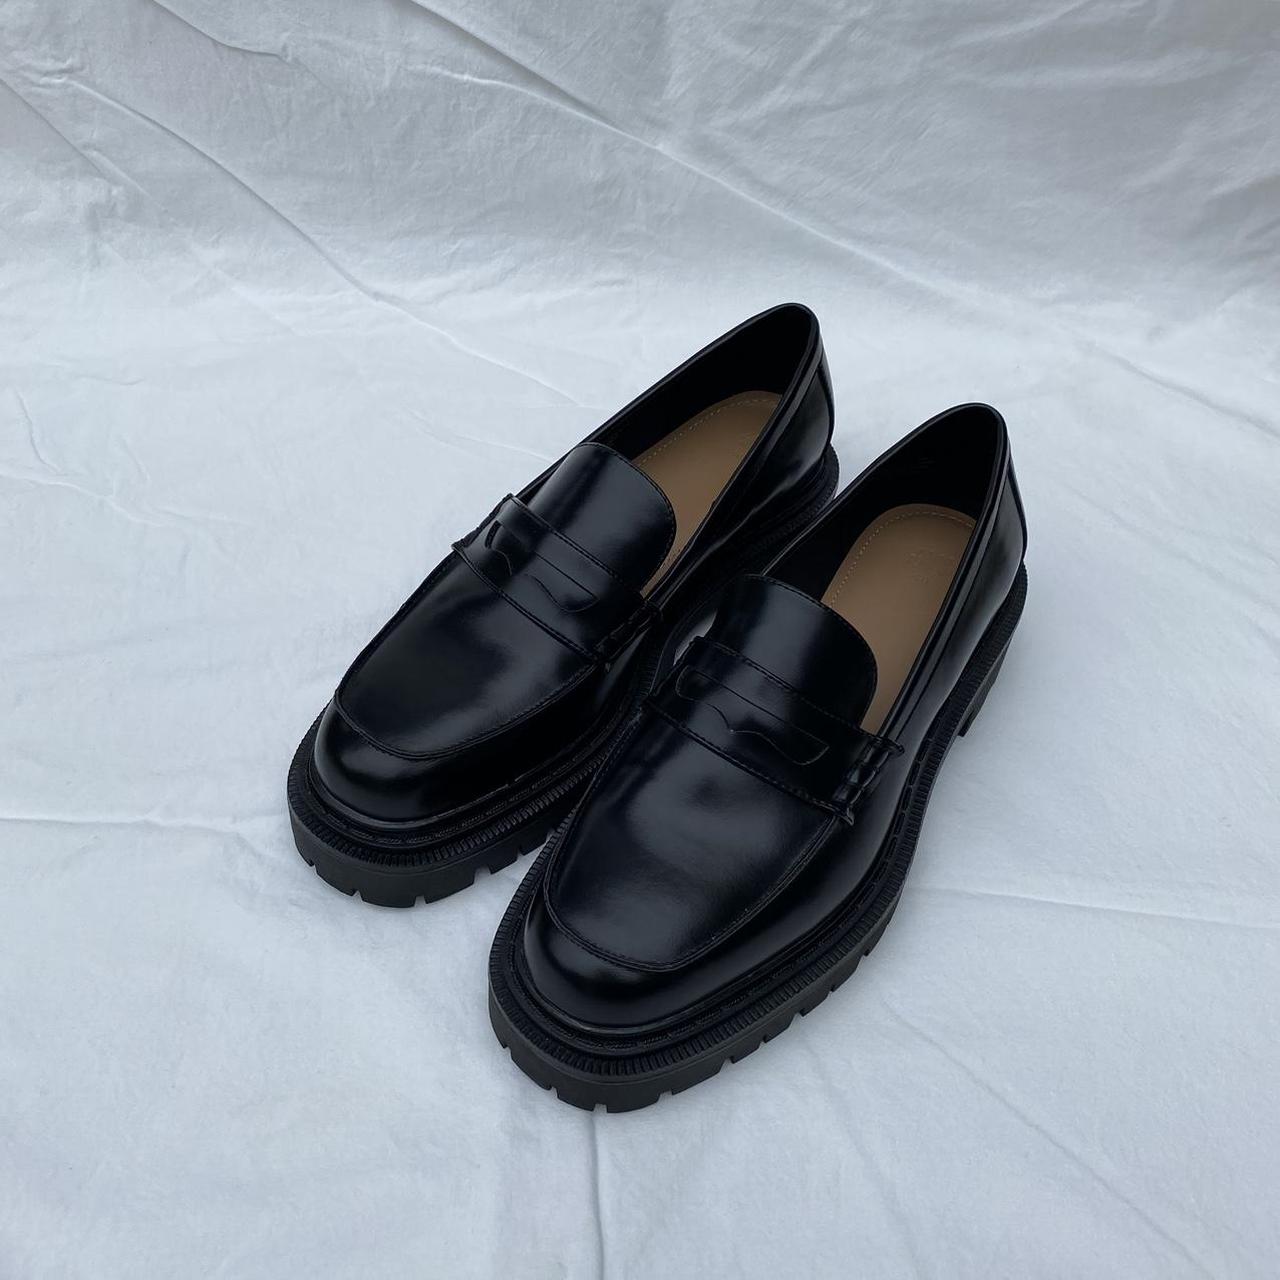 H&M Women's Black Loafers (3)